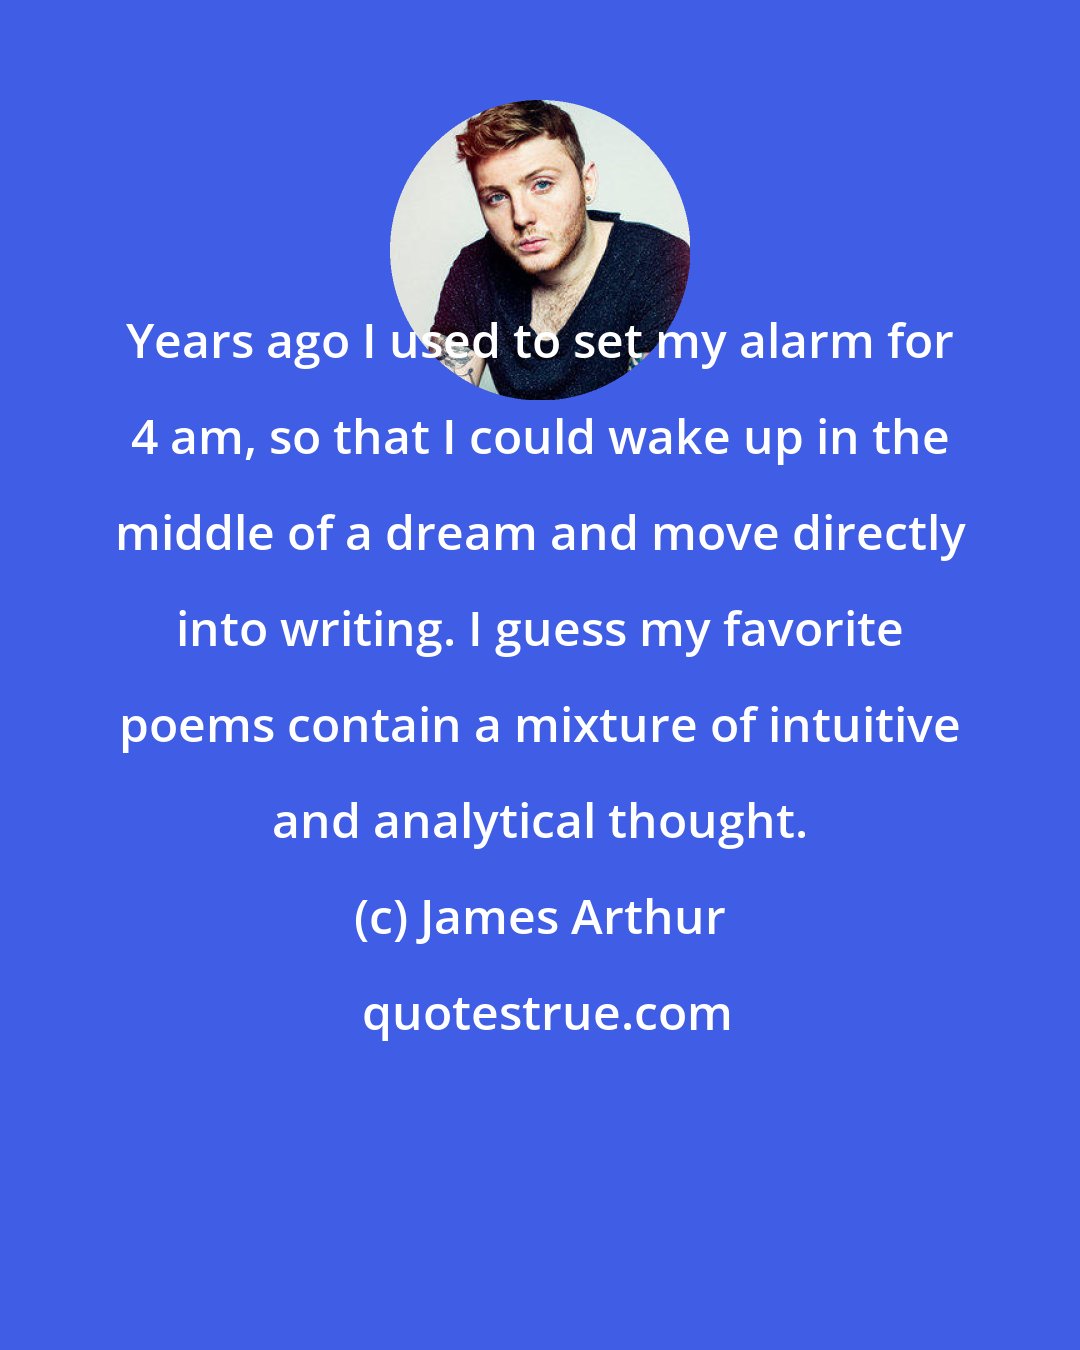 James Arthur: Years ago I used to set my alarm for 4 am, so that I could wake up in the middle of a dream and move directly into writing. I guess my favorite poems contain a mixture of intuitive and analytical thought.